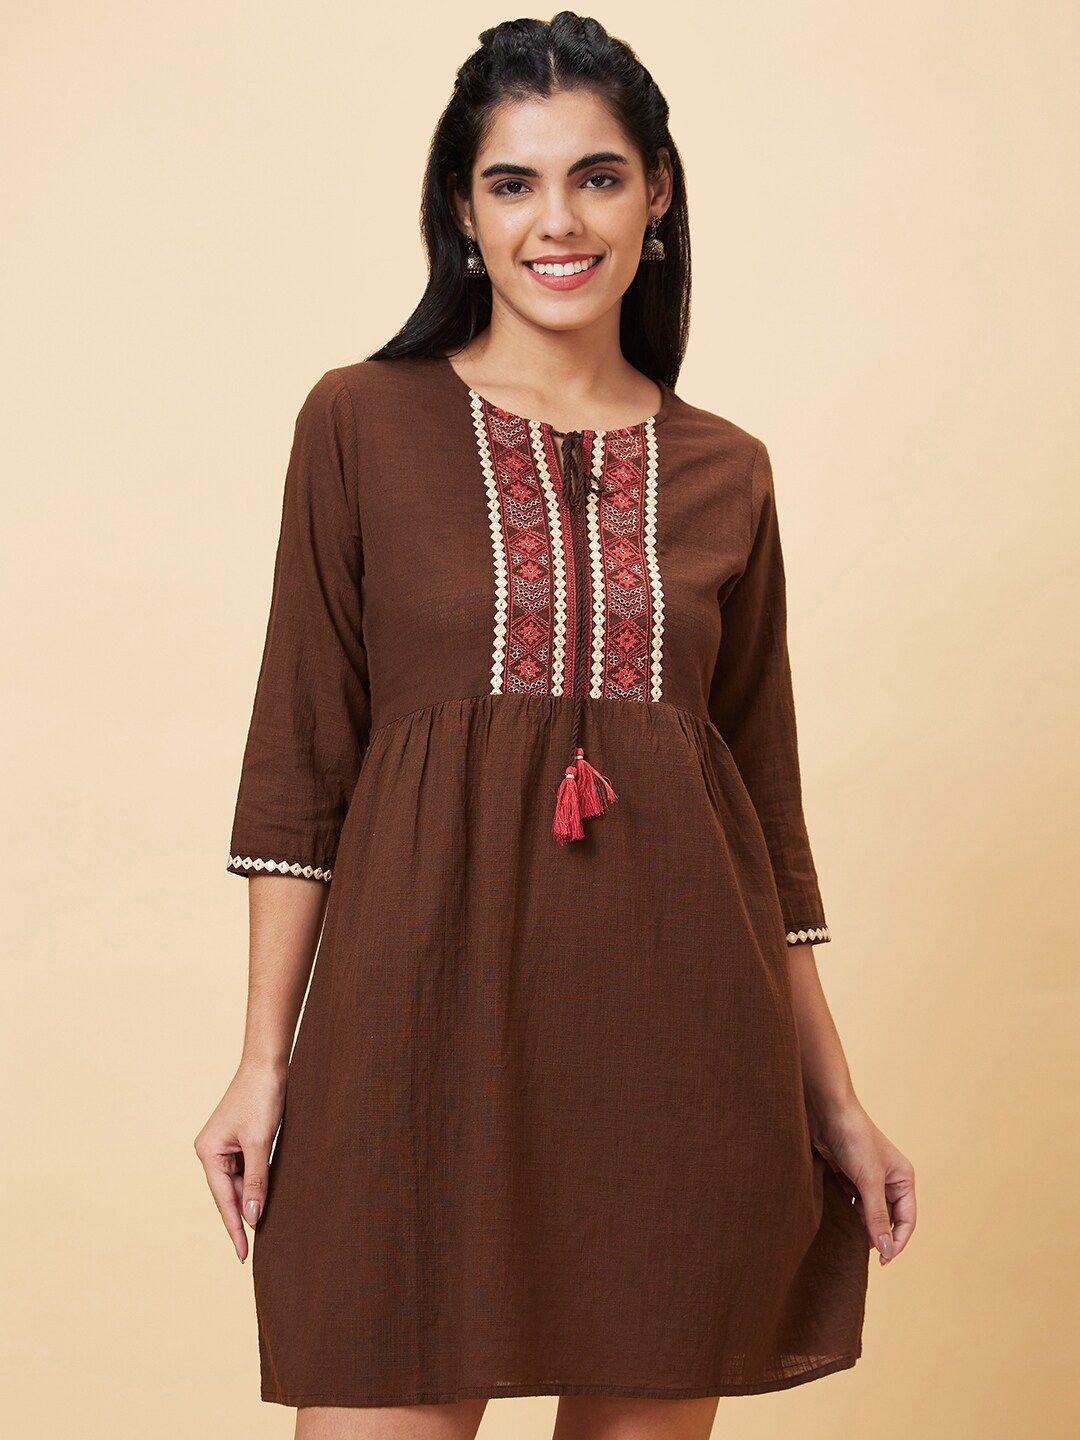 globus-brown-tie-up-neck-embroidered-cotton-a-line-dress